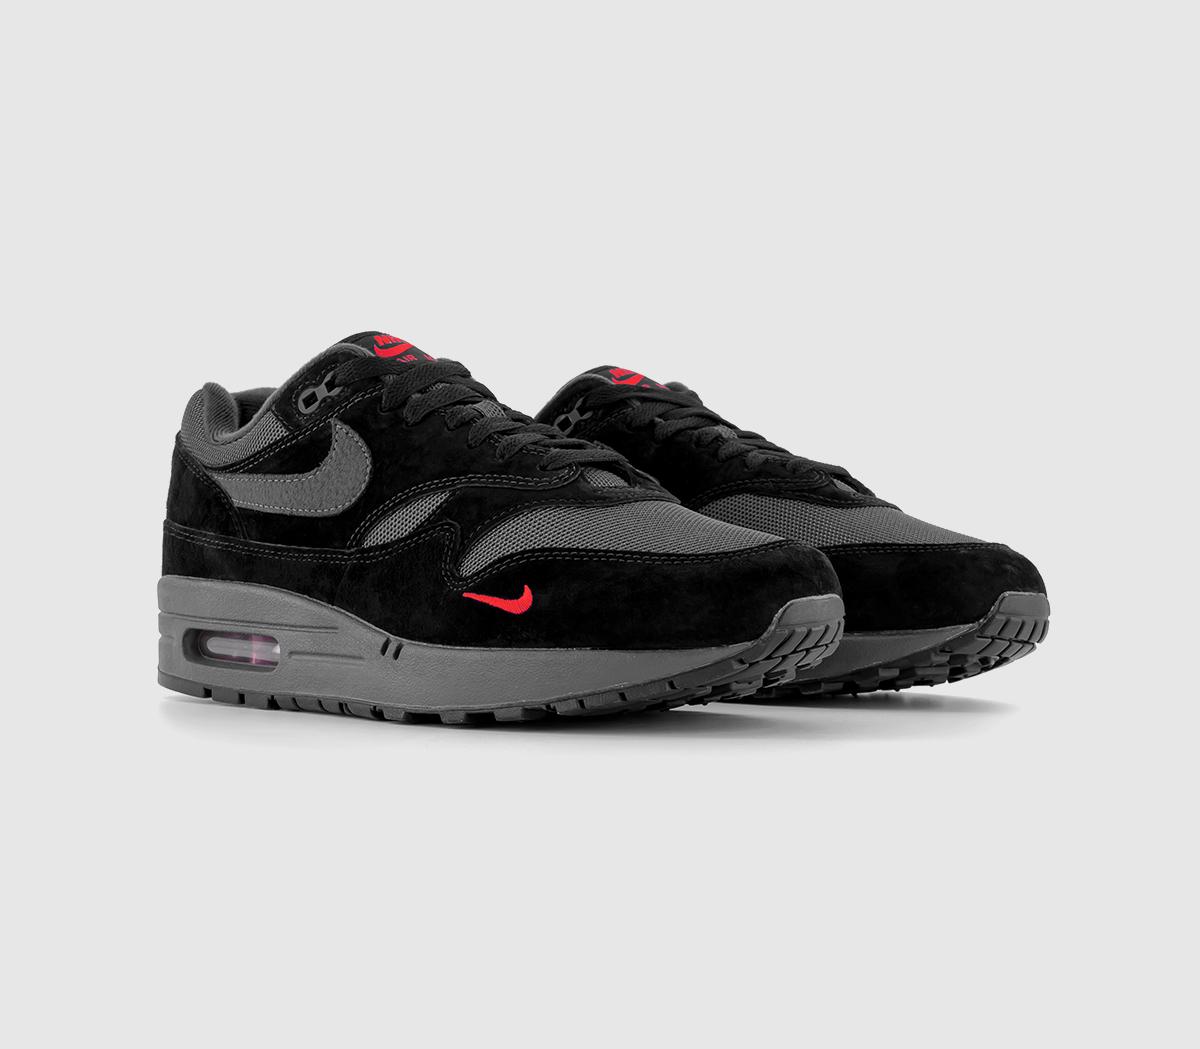 Nike Air Max 1 Trainers Black Anthracite University Red, 10.5